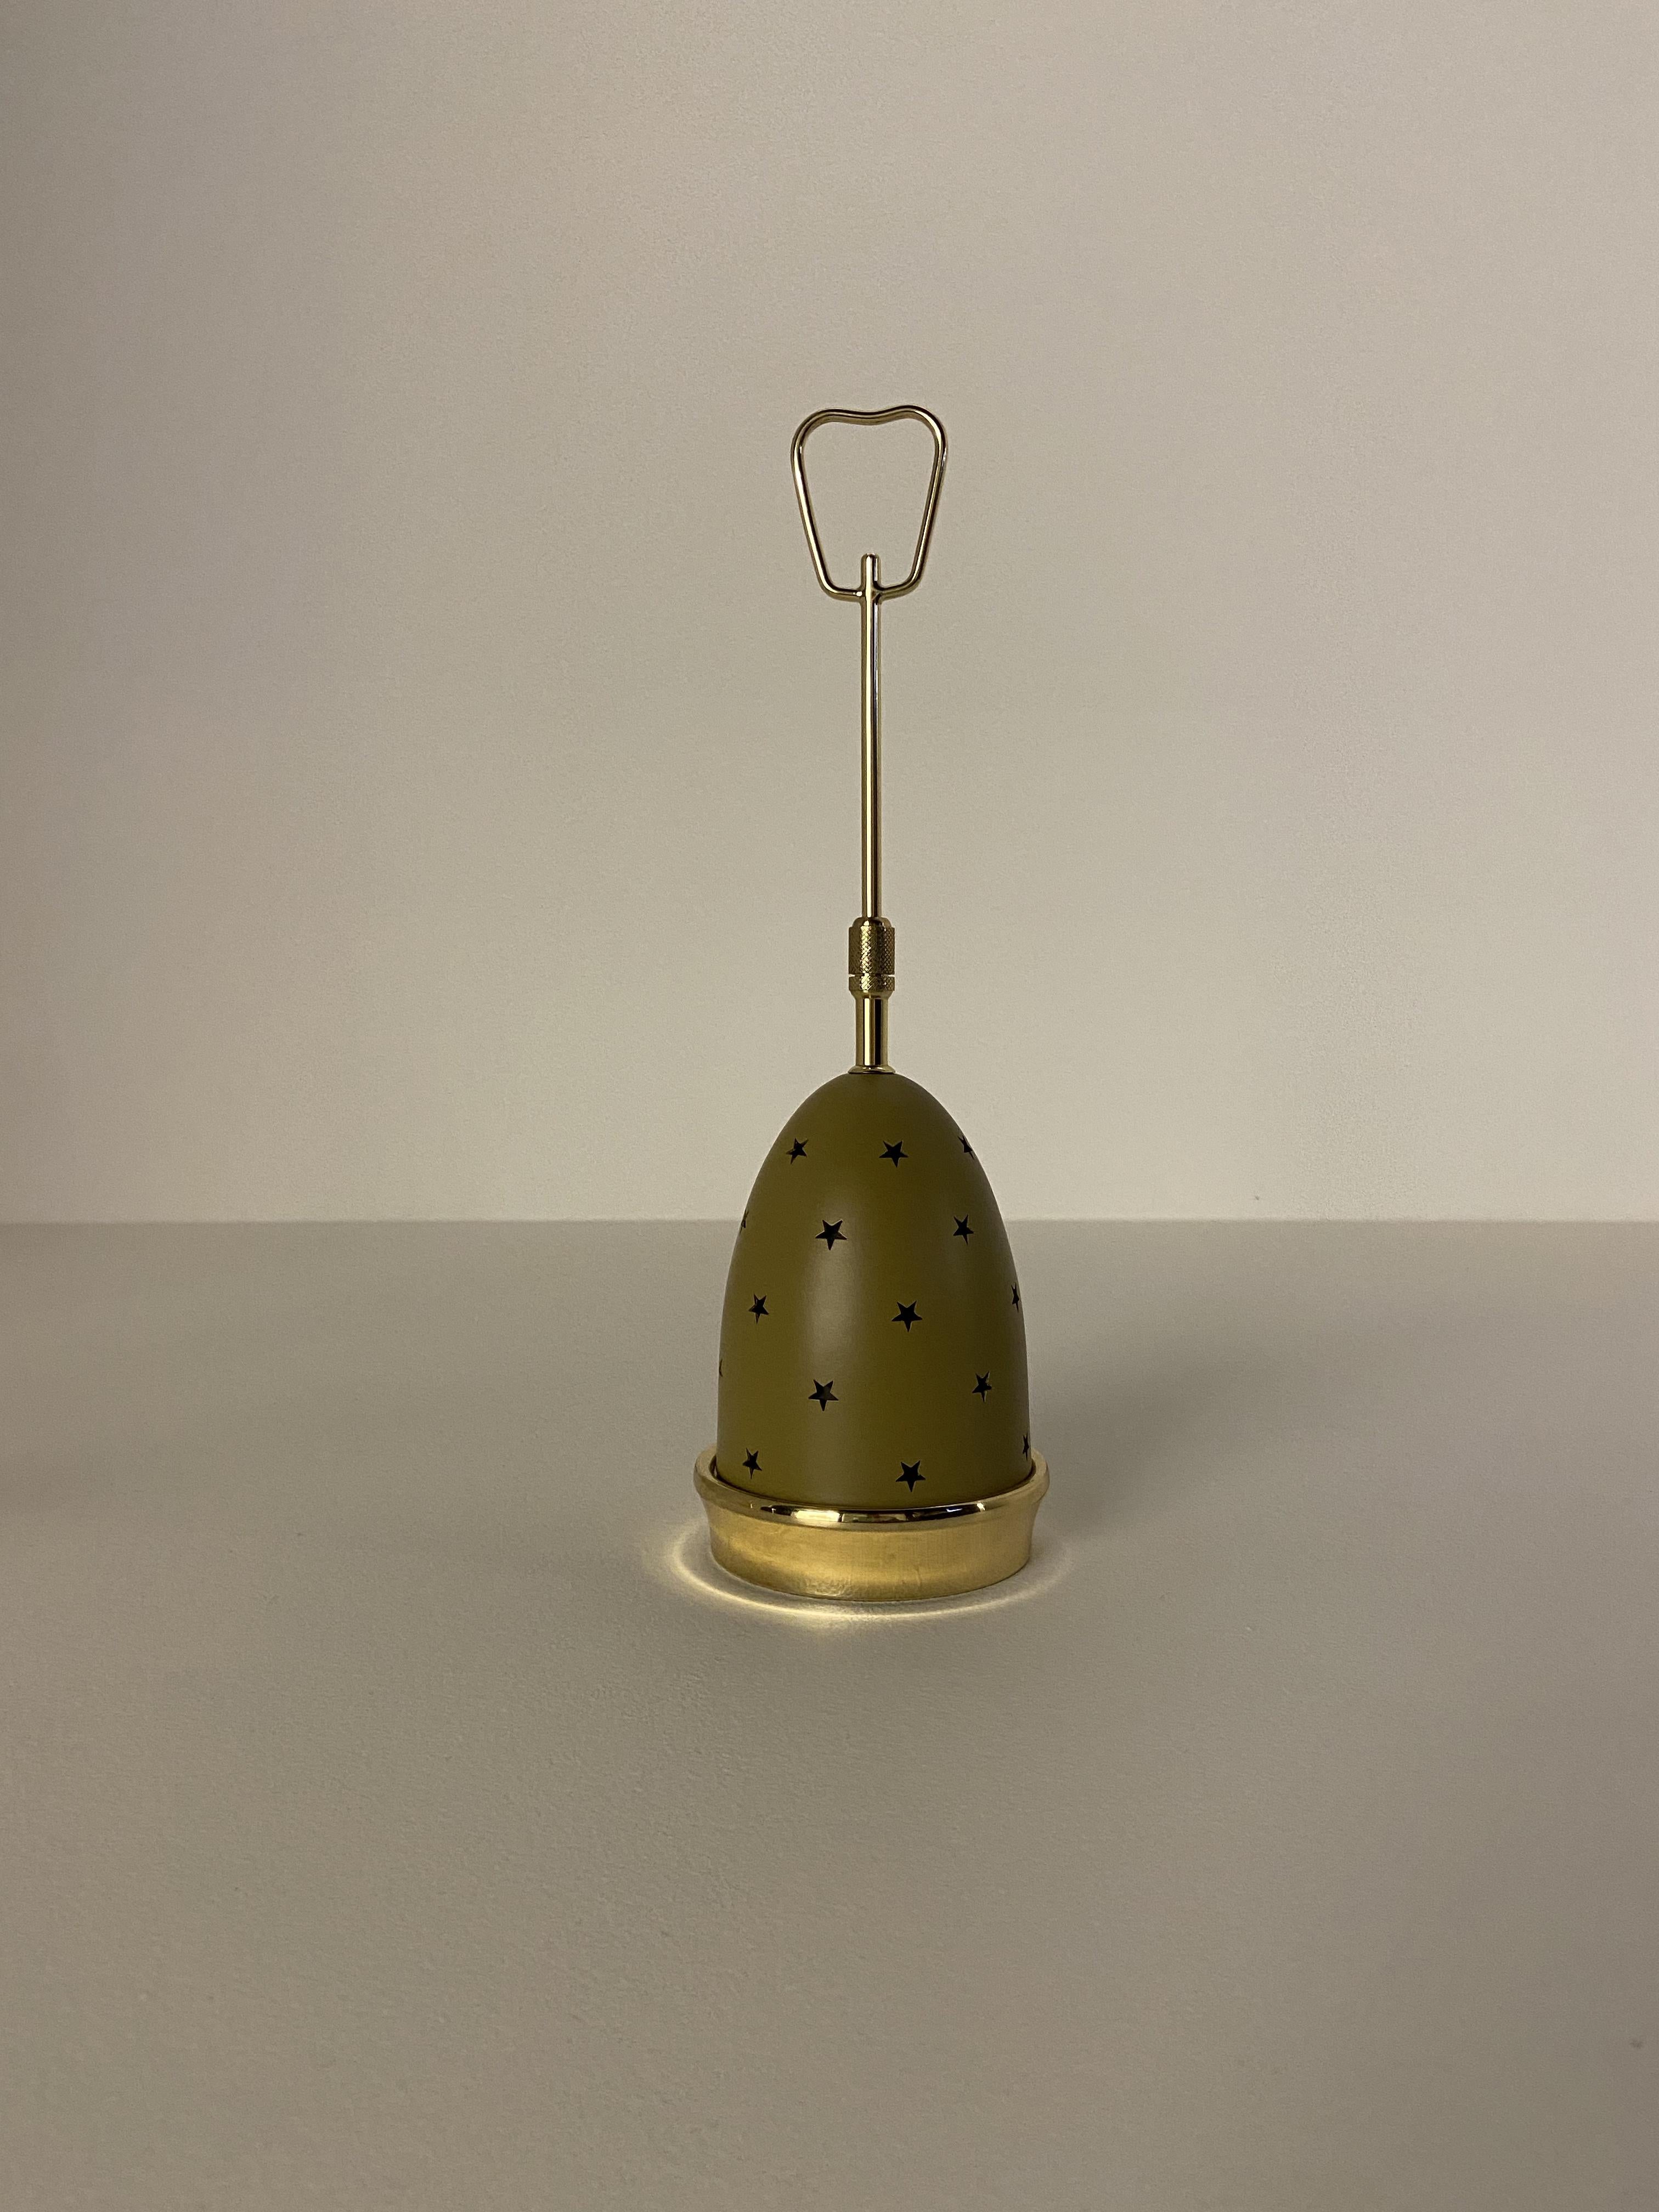 Icon of Arredoluce, this lamp became history when it was included in the supply that the brand sent to the Kennedy family, and was designed by Angelo Lelii in the early Fifties. It is a table lamp with an enameled shade that can be moved up and down